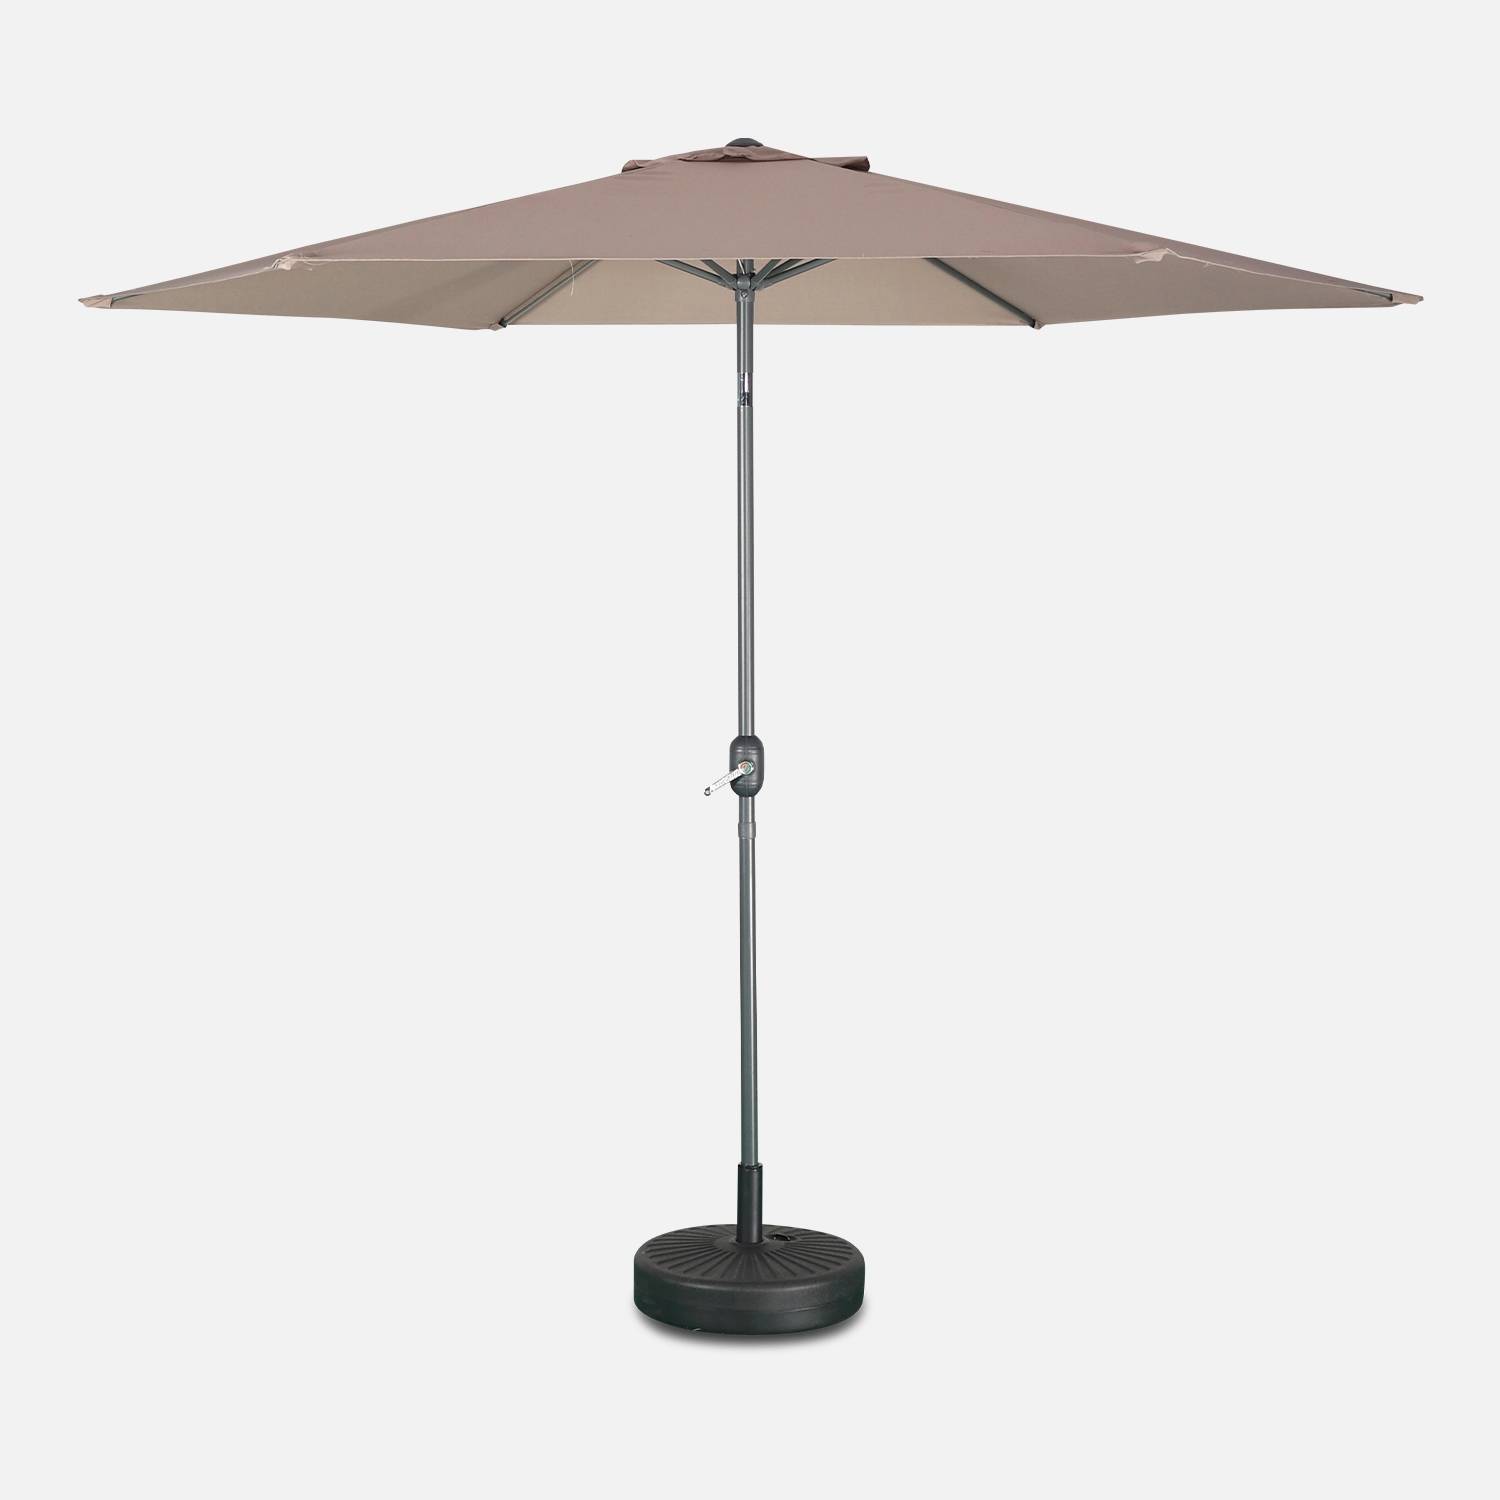 Stokparasol TOUQUET - Ø295cm - Rond - Taupe | sweeek